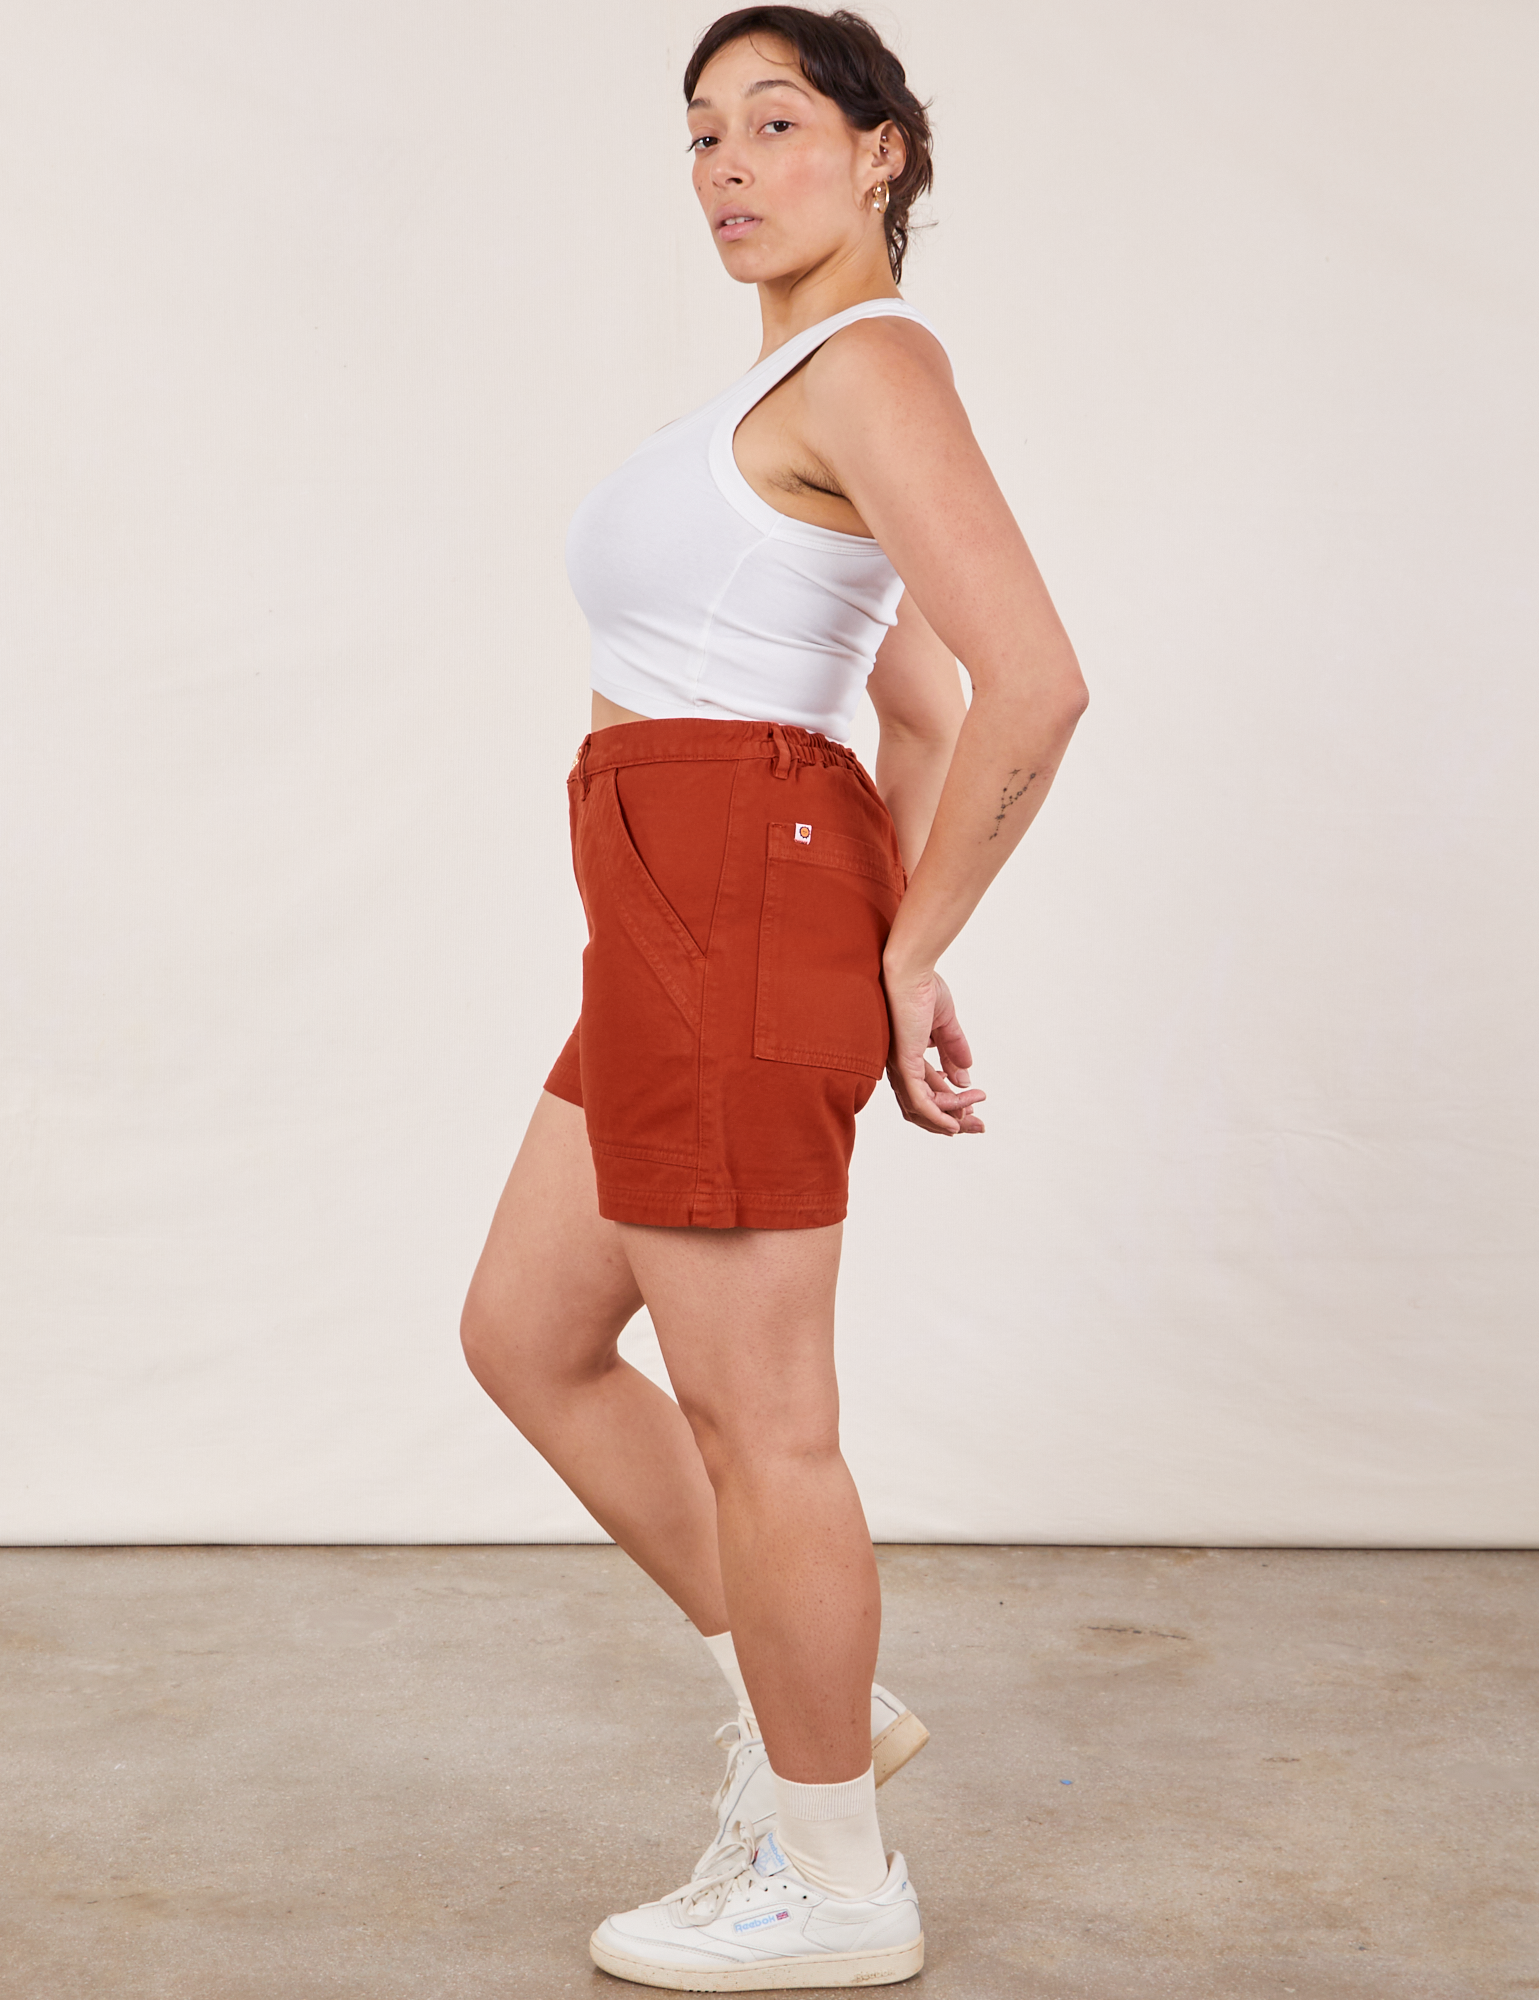 Side view of Classic Work Shorts in Paprika and Cropped Tank Top in vintage tee off-white on Tiara